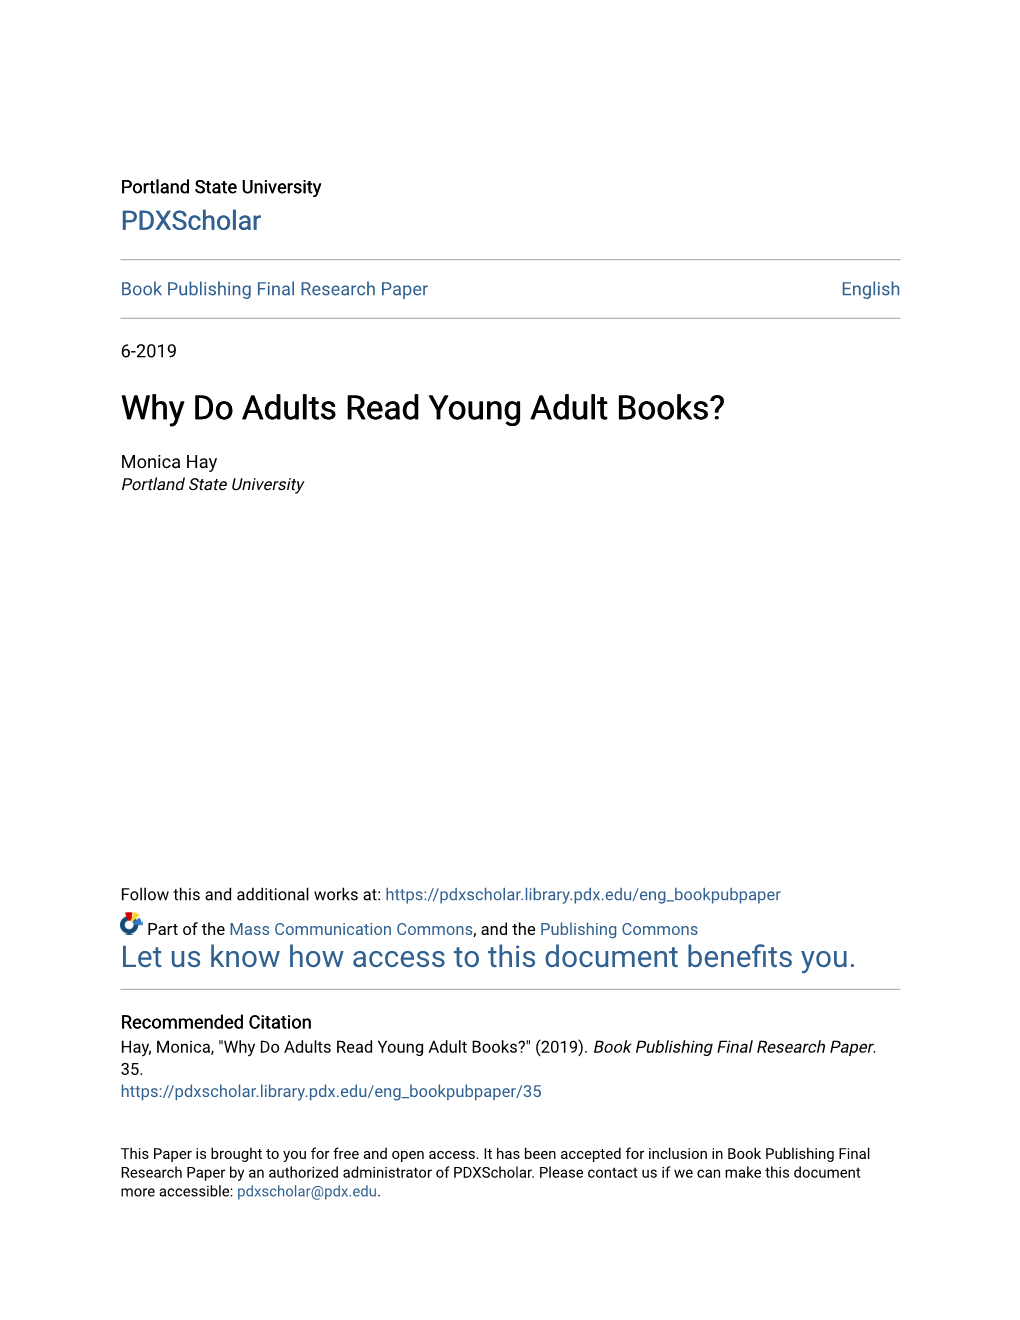 Why Do Adults Read Young Adult Books?